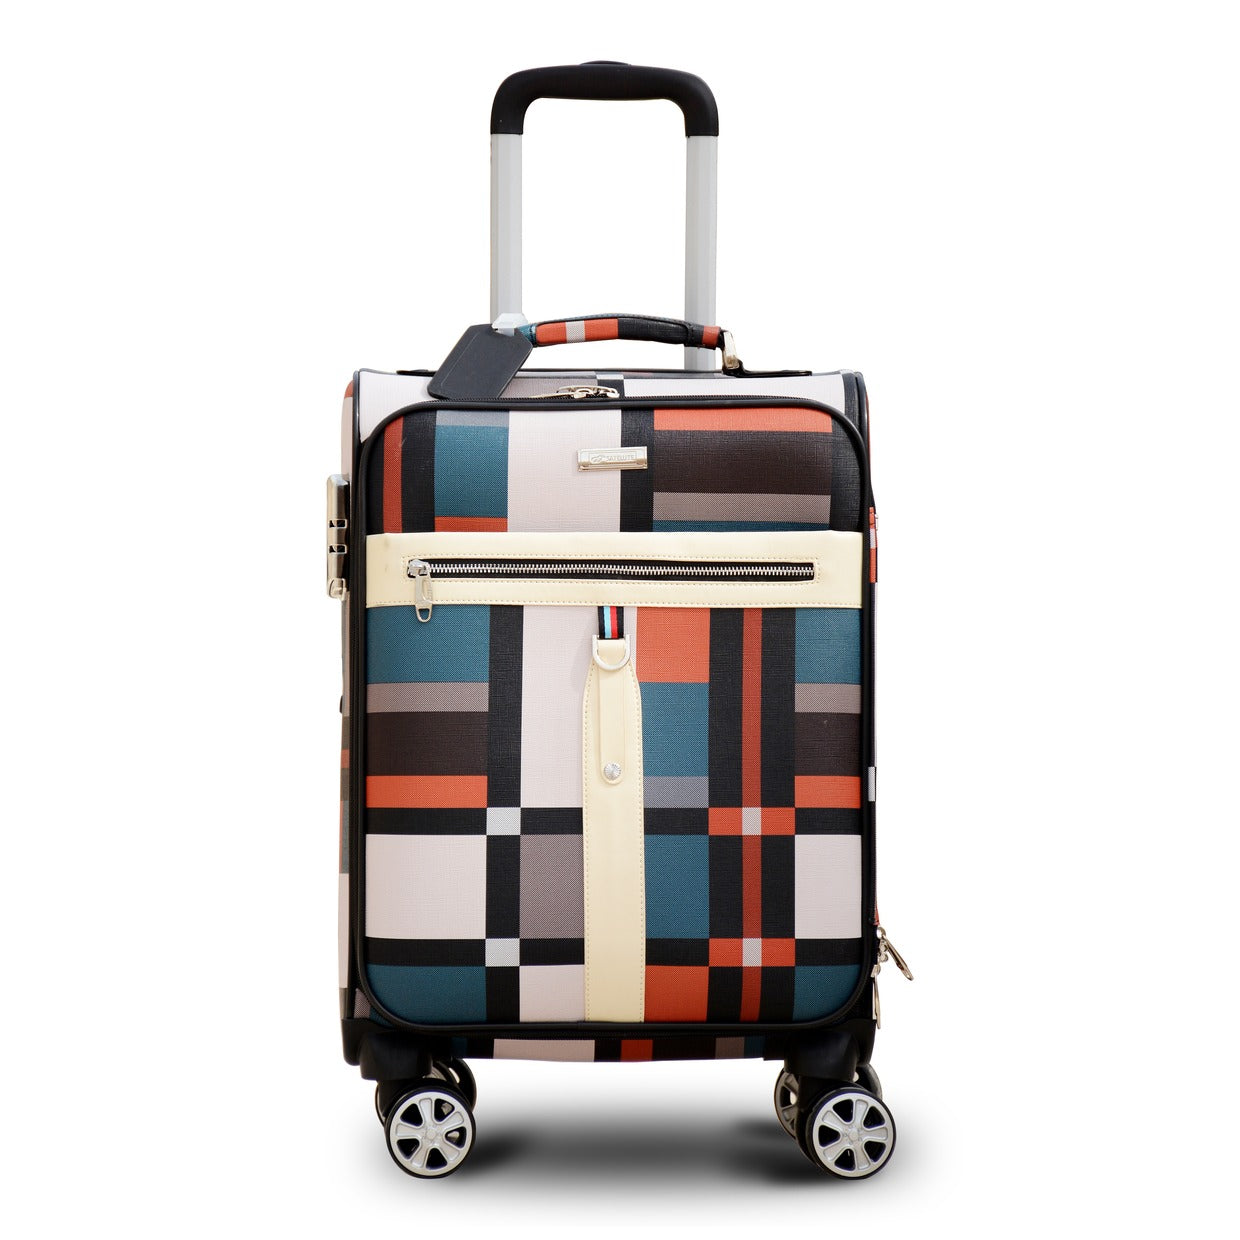 PU Check Lightweight Soft Material Luggage Bag with Double Spinner wheel Zaappy